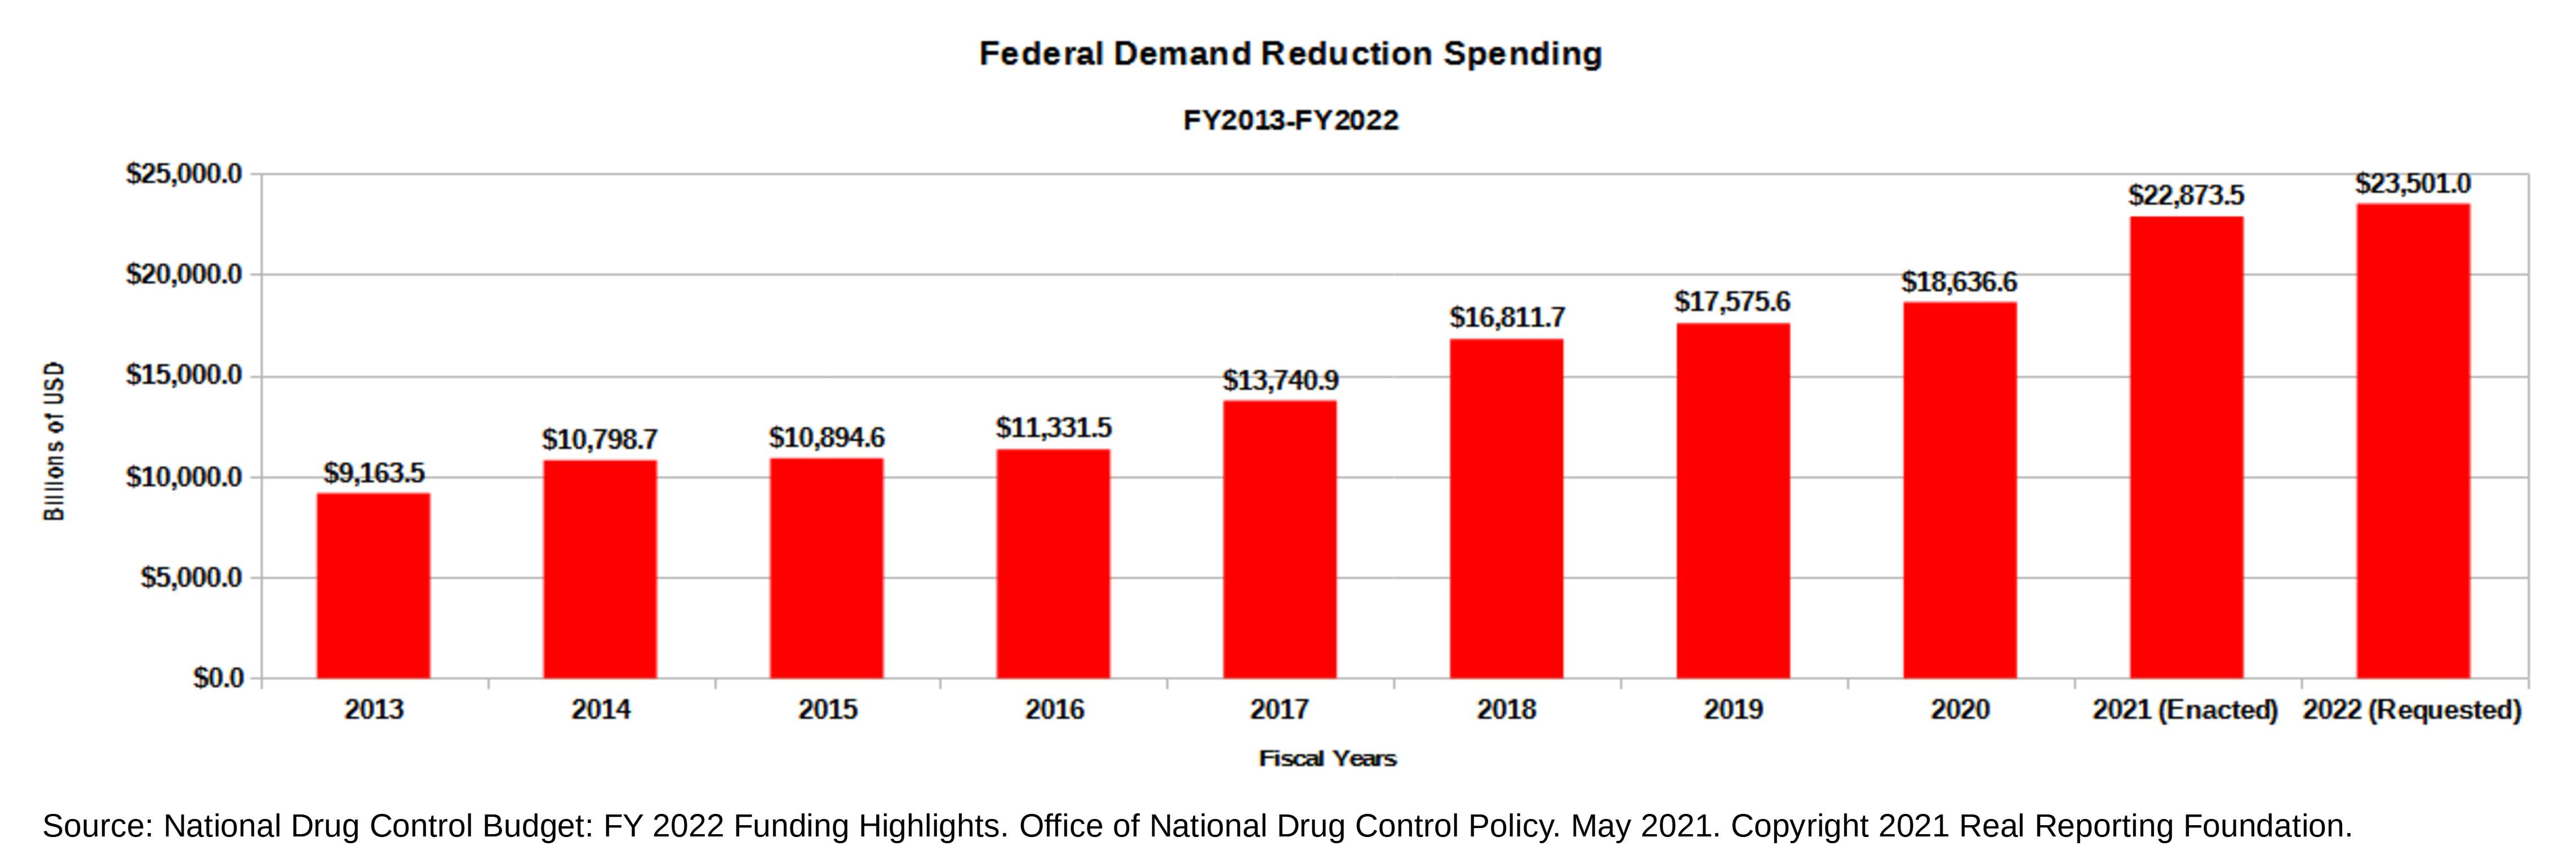 bar graph showing federal drug control spending on the demand side from FY2013 through FY2022